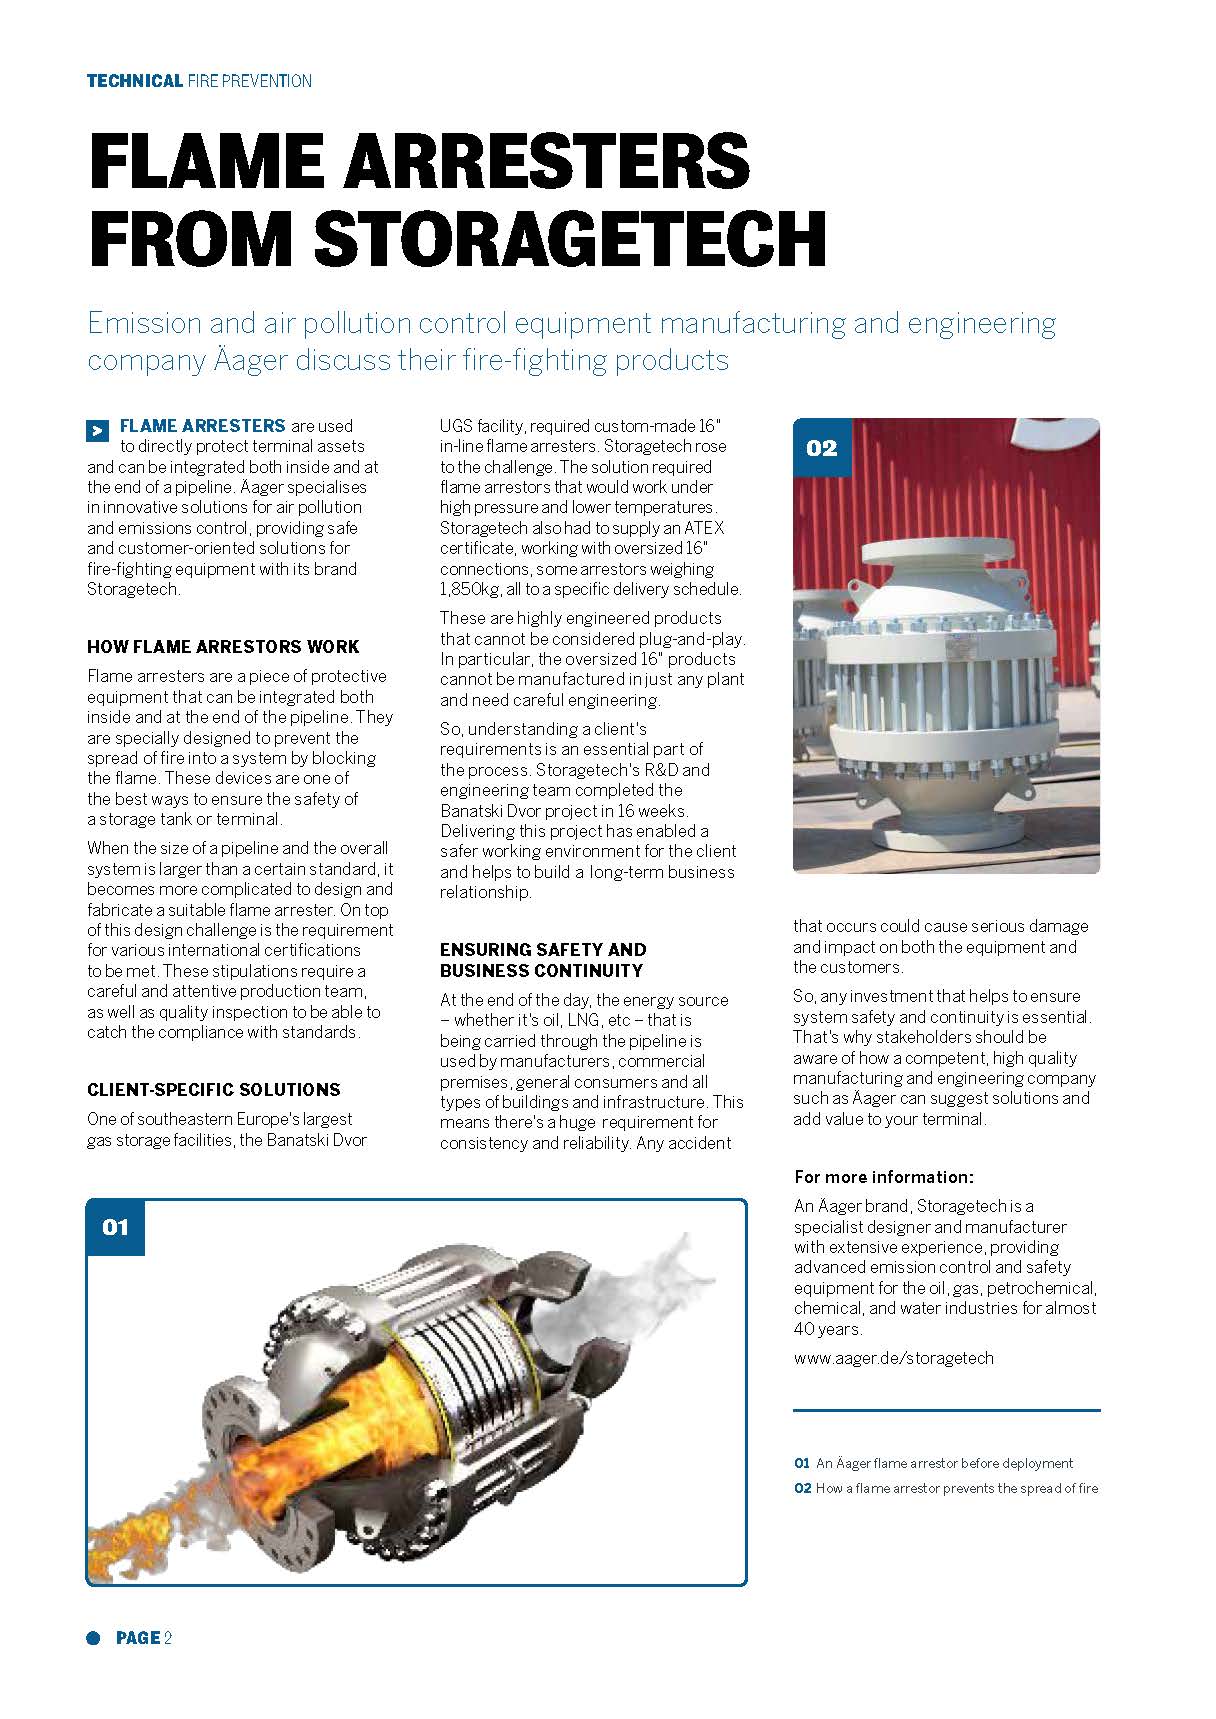 Customer-Oriented Flame Arresters from Storagetech – Tank Storage Magazine Article 27